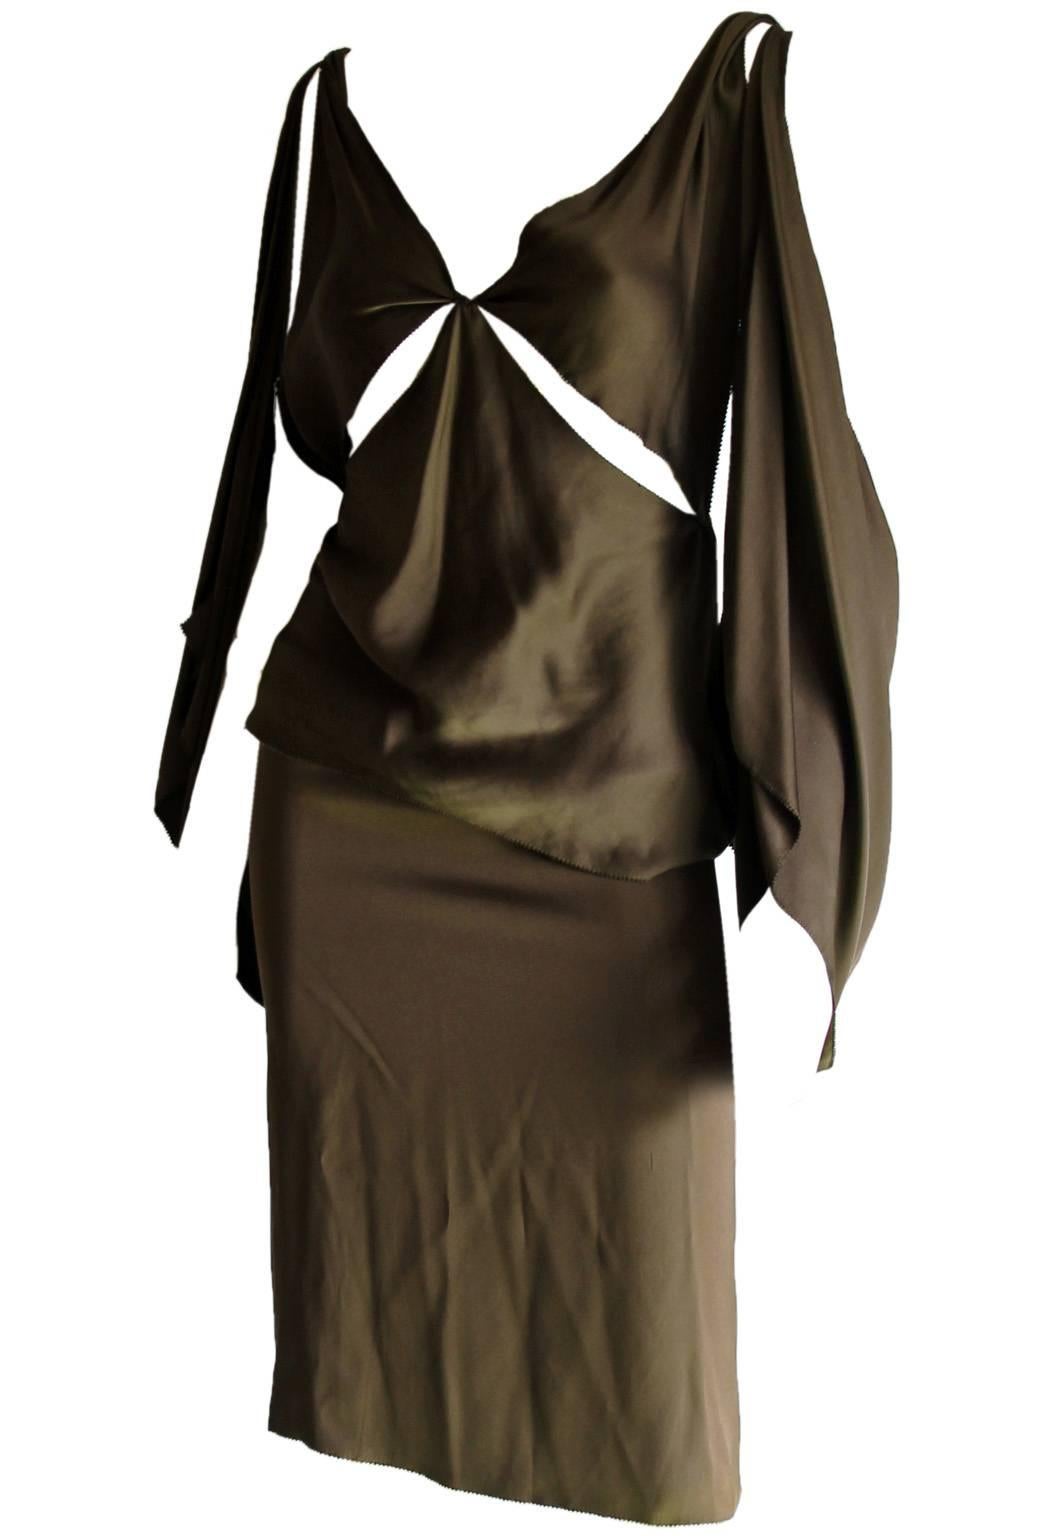 Uber-Rare & Iconic Tom Ford For Gucci Fall Winter 2002 Gothic Collection Khaki Silk Kimono Runway & Ad Campaign Top, Skirt & Pants!

Who could ever forget Tom Ford's fall/winter 2002 Gothic Collection for Gucci... with that dark chinoiseriesque